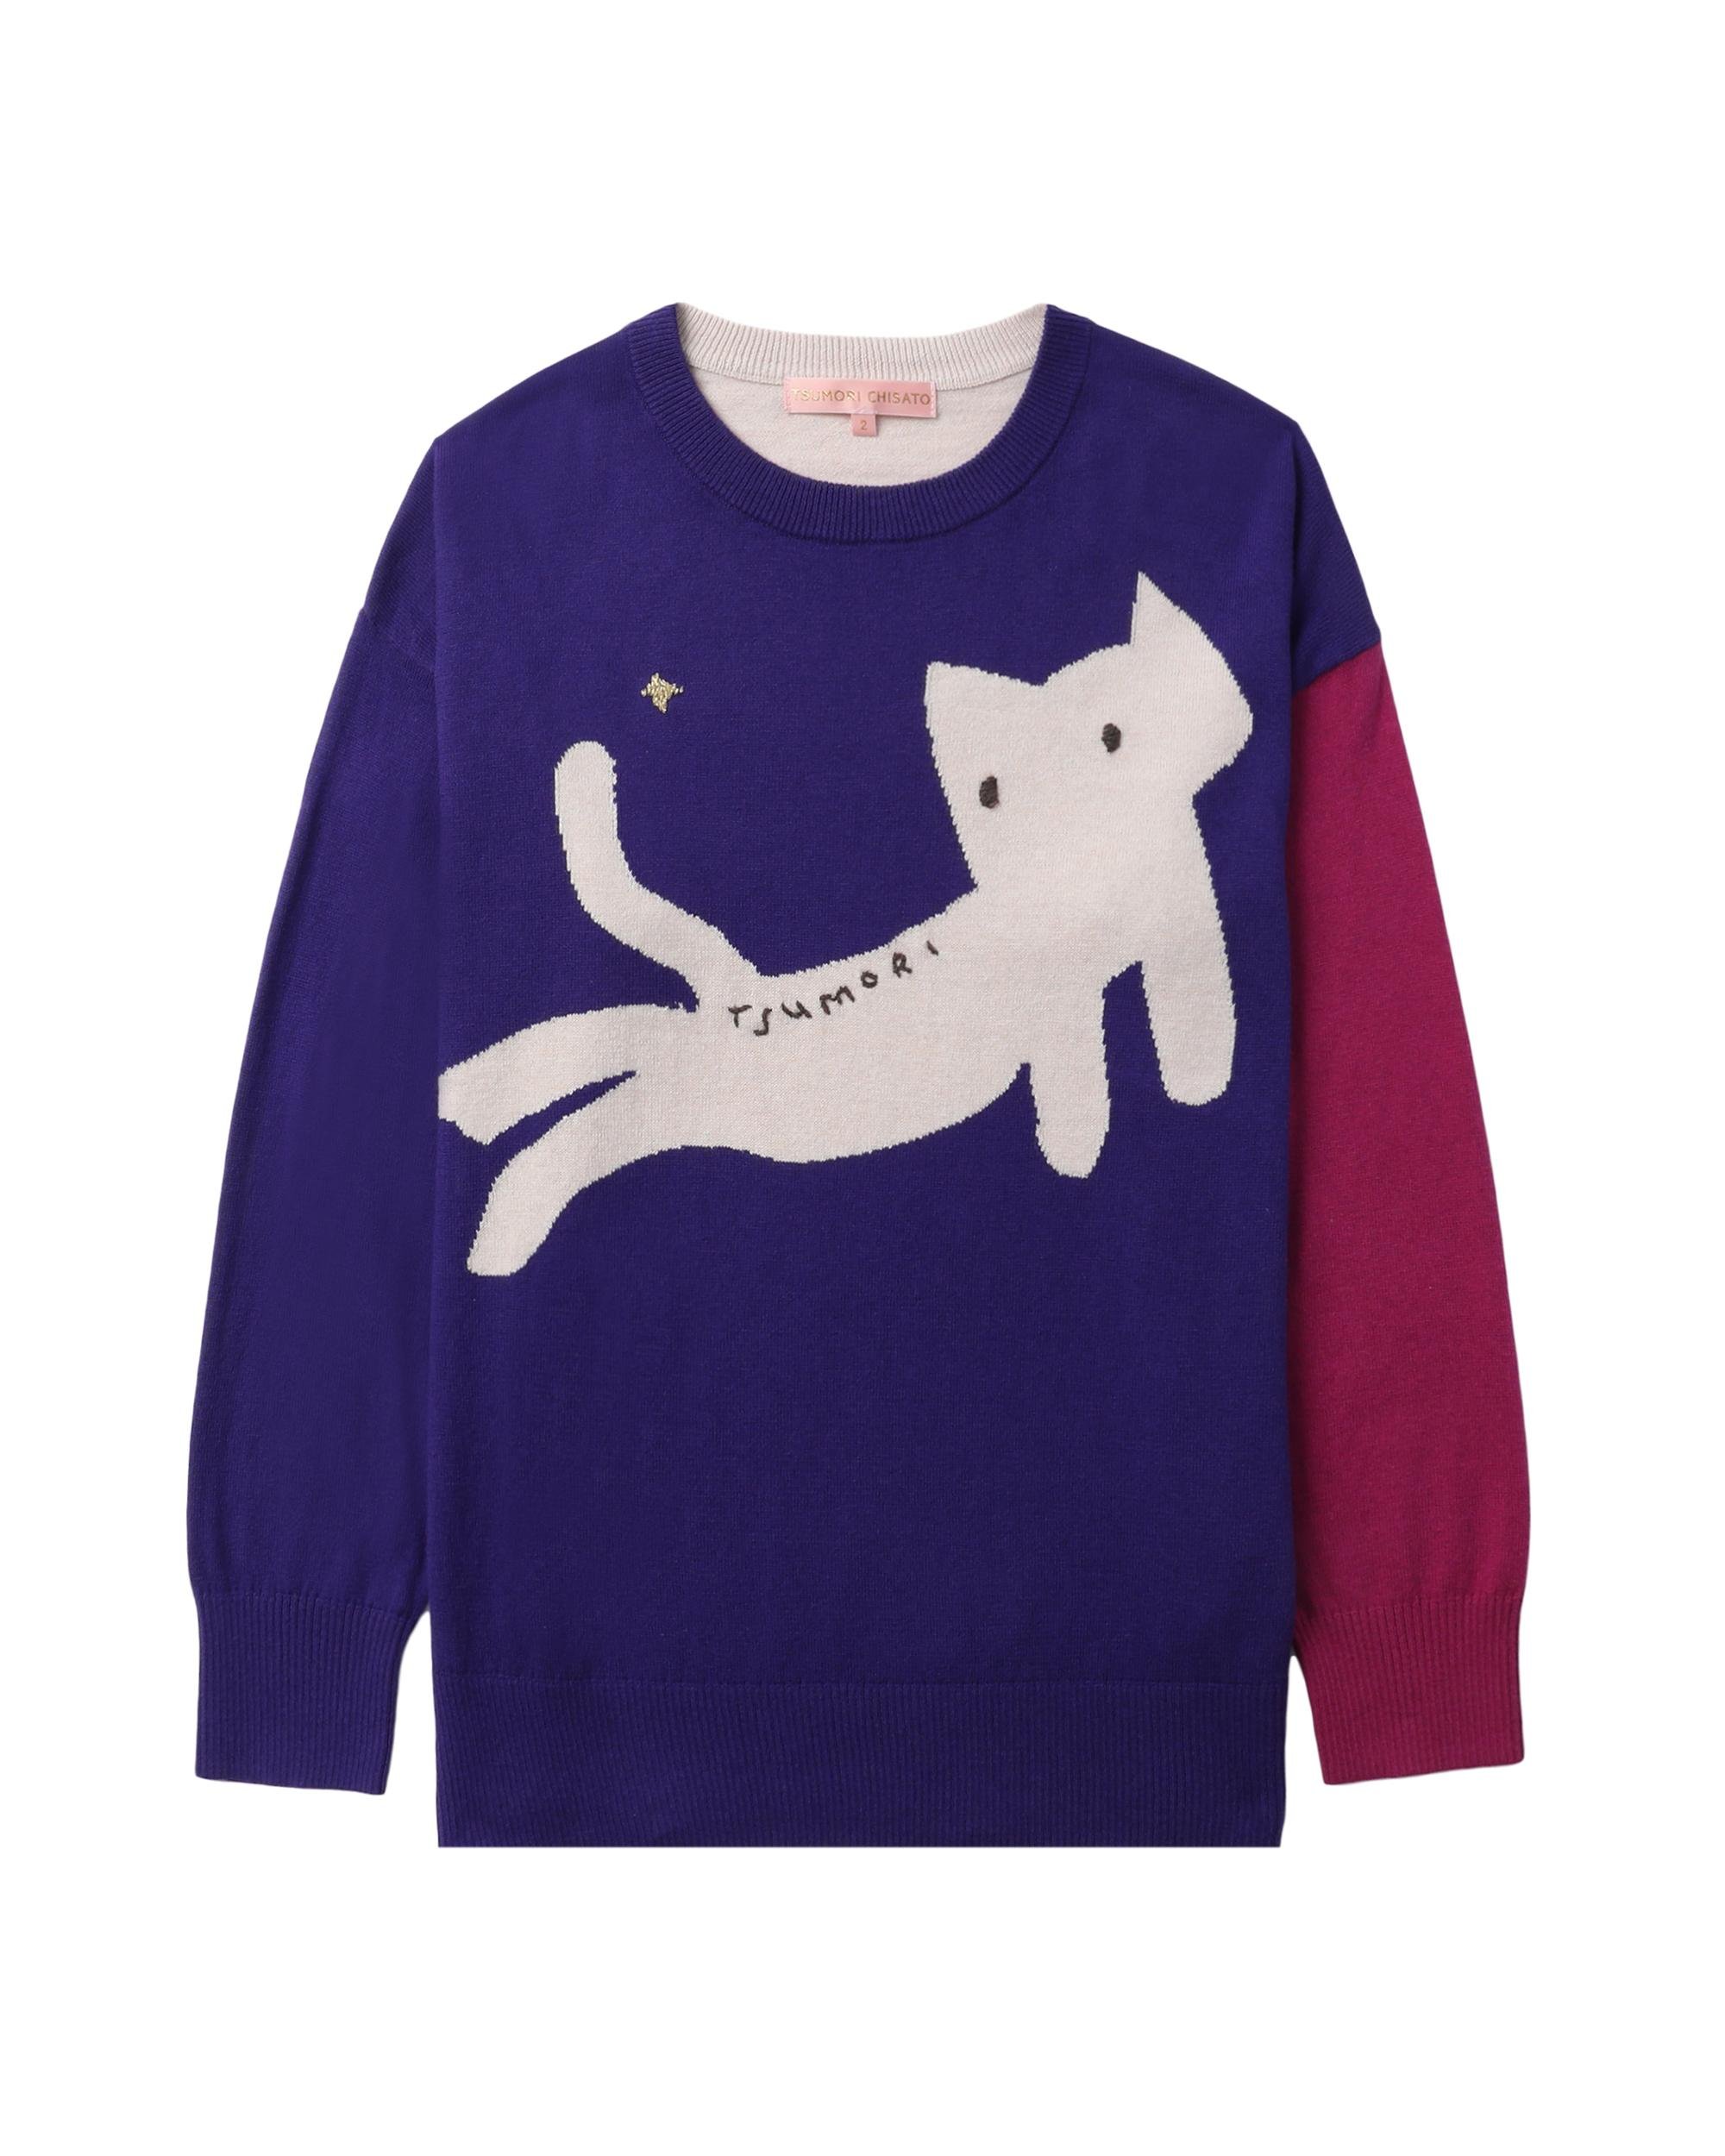 Colour blocked cotton wool jumper by TSUMORI CHISATO